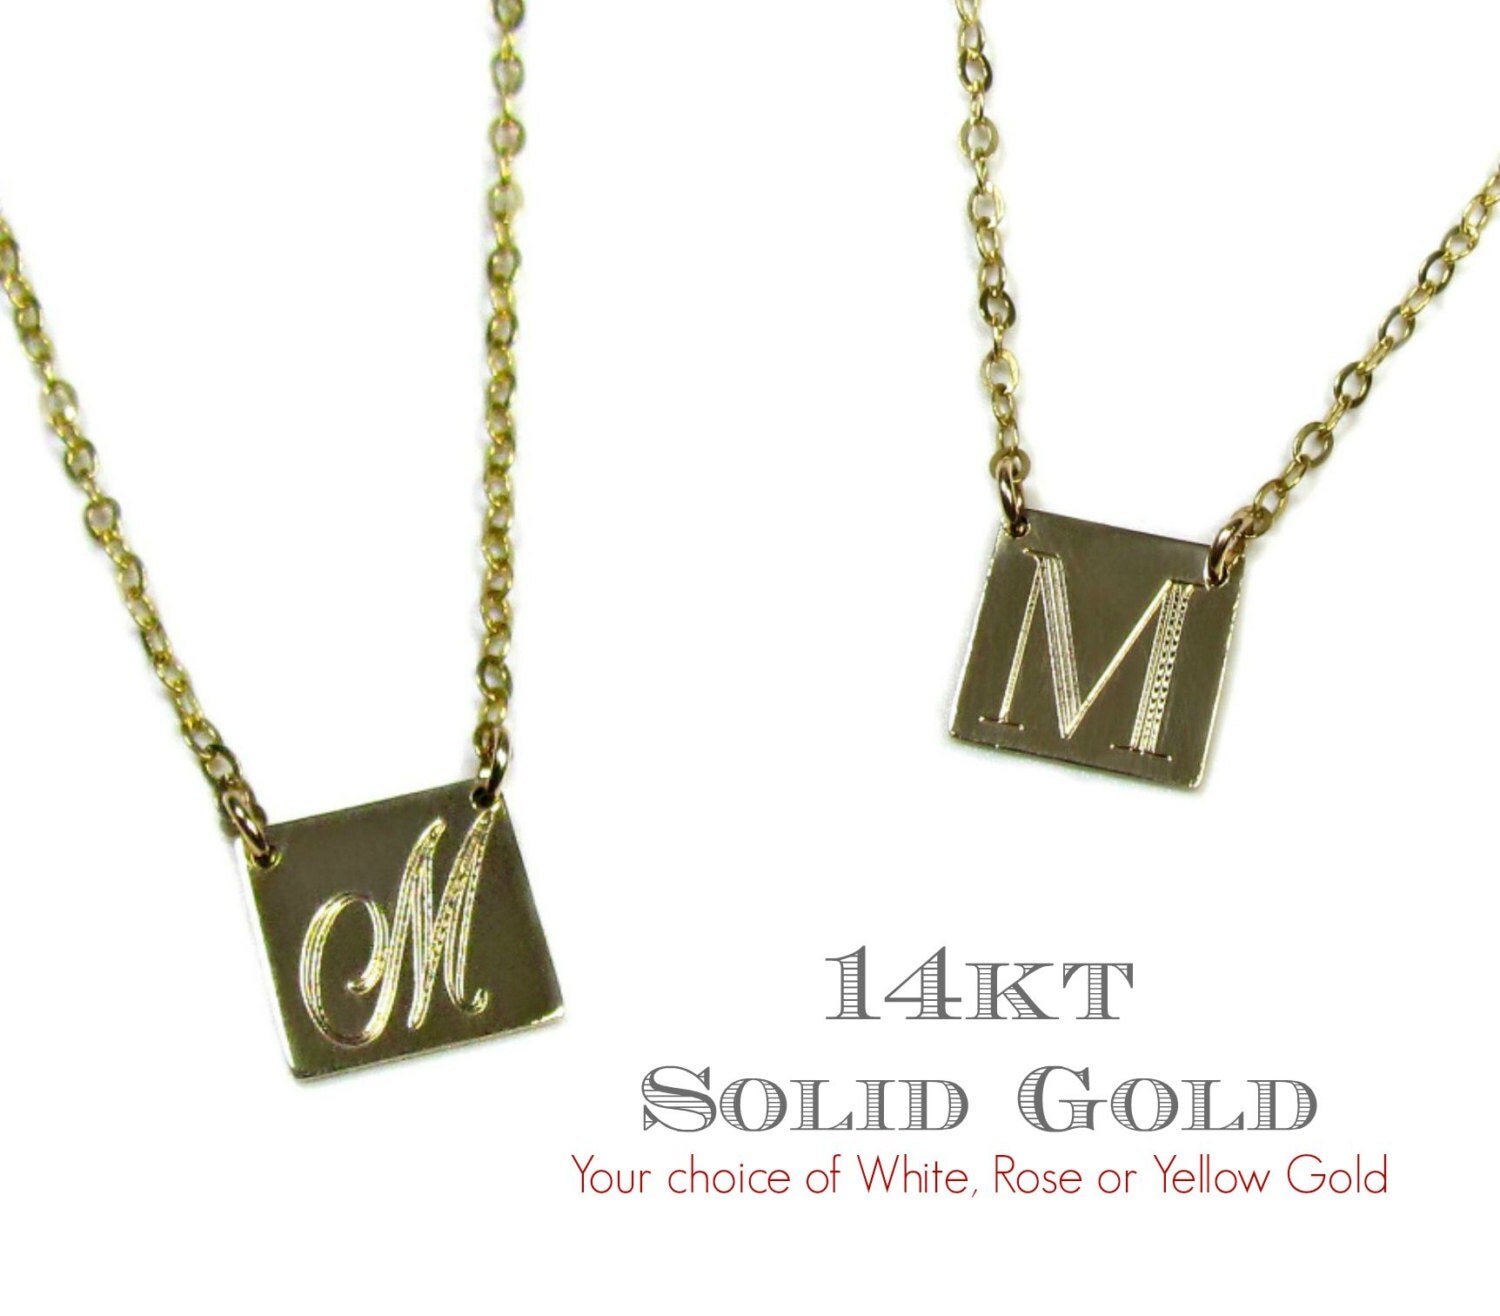 14KT SOLID GOLD Square Engraved Initial Necklace in 14Kt